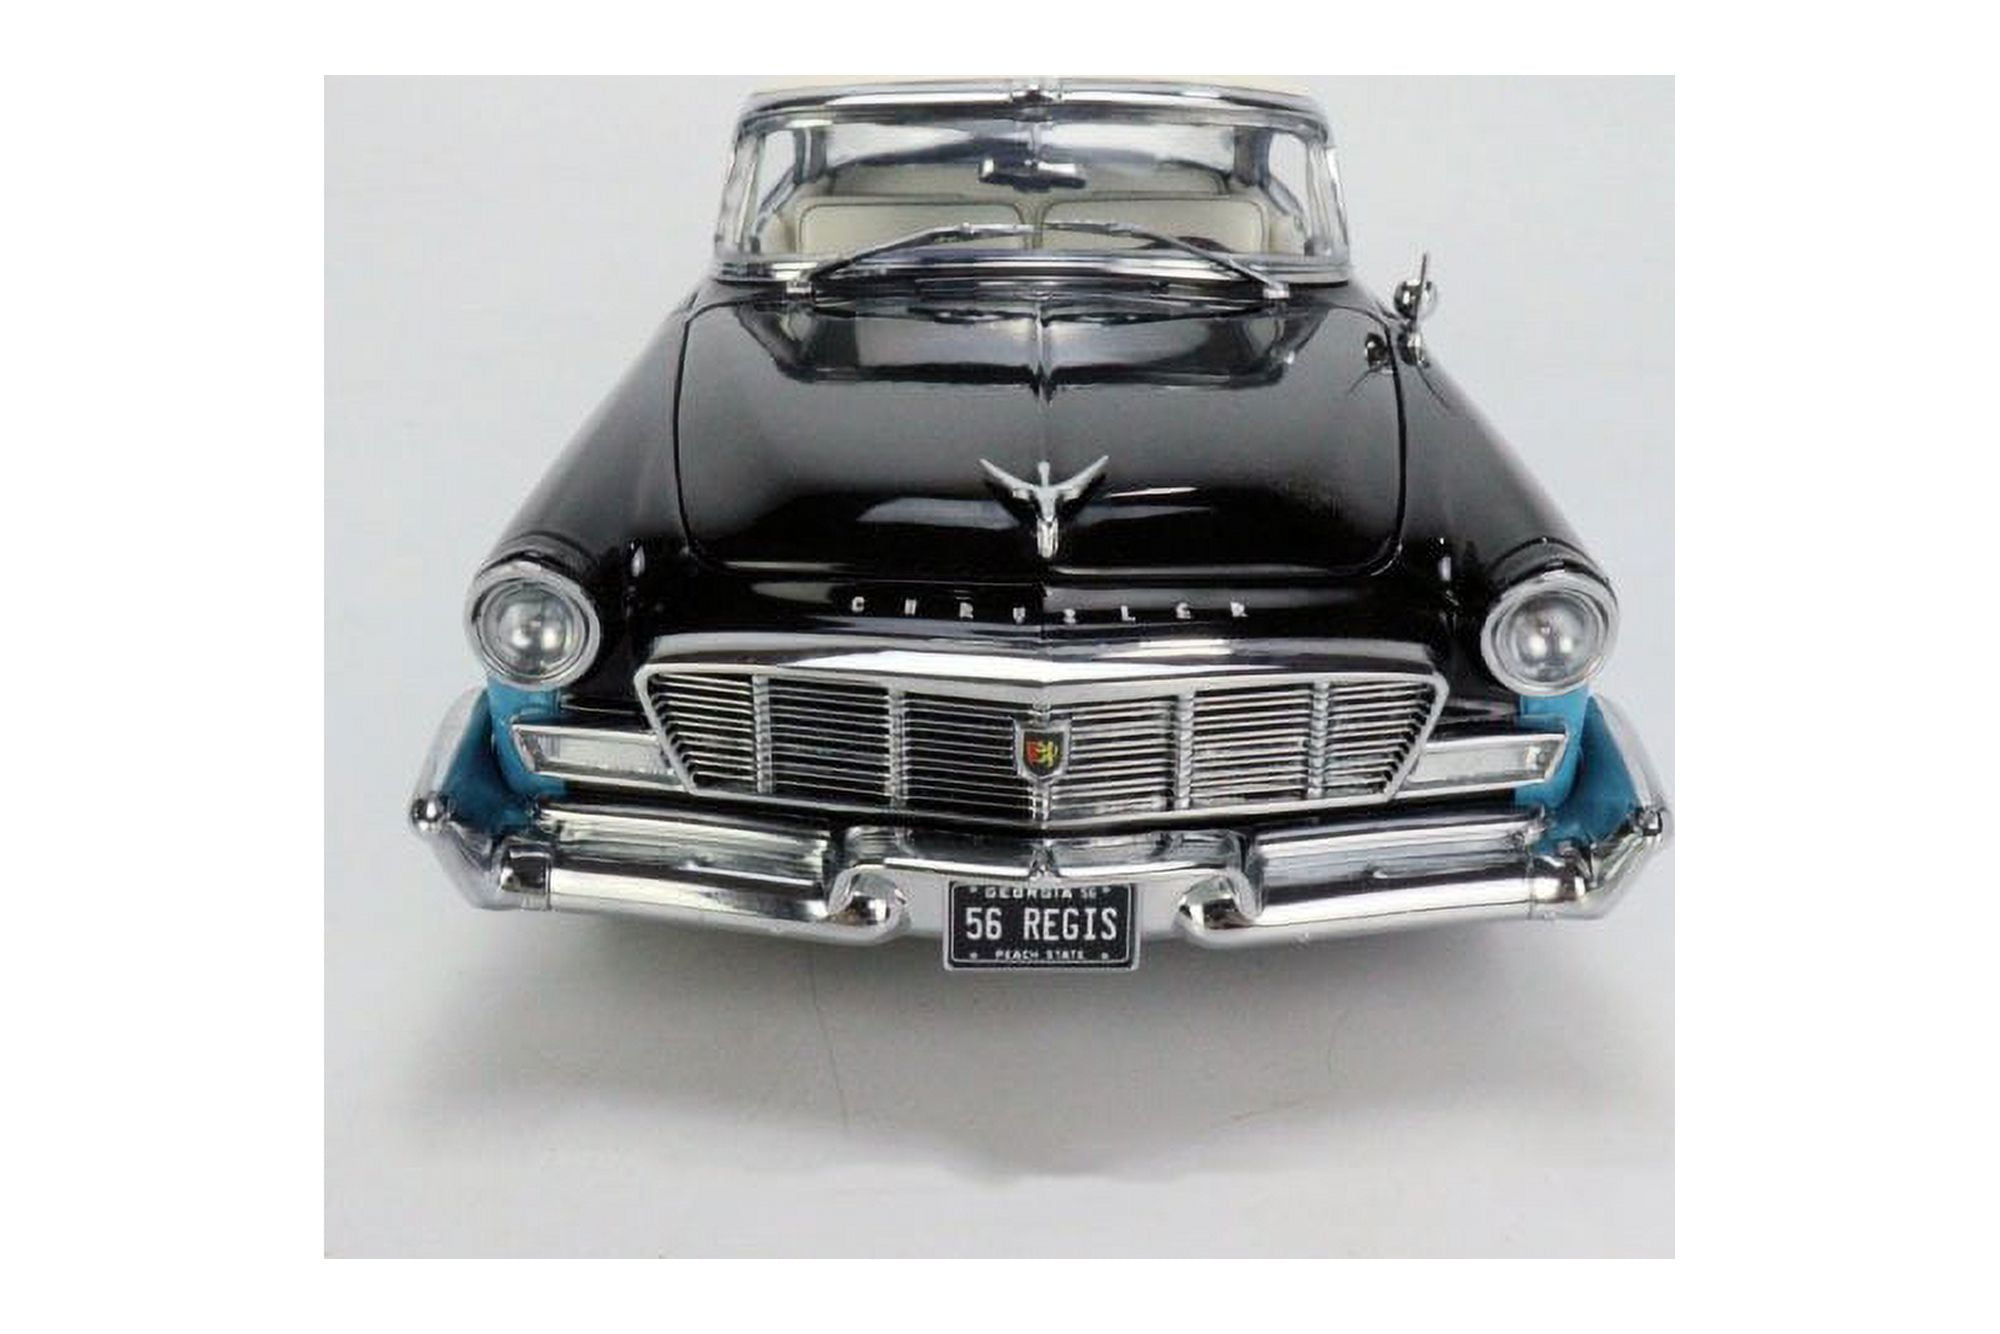 1956 Chrysler New Yorker St. Regis, Stardust Blue and Raven Black - Acme  A1809007 - 1/18 scale Diecast Model Toy Car